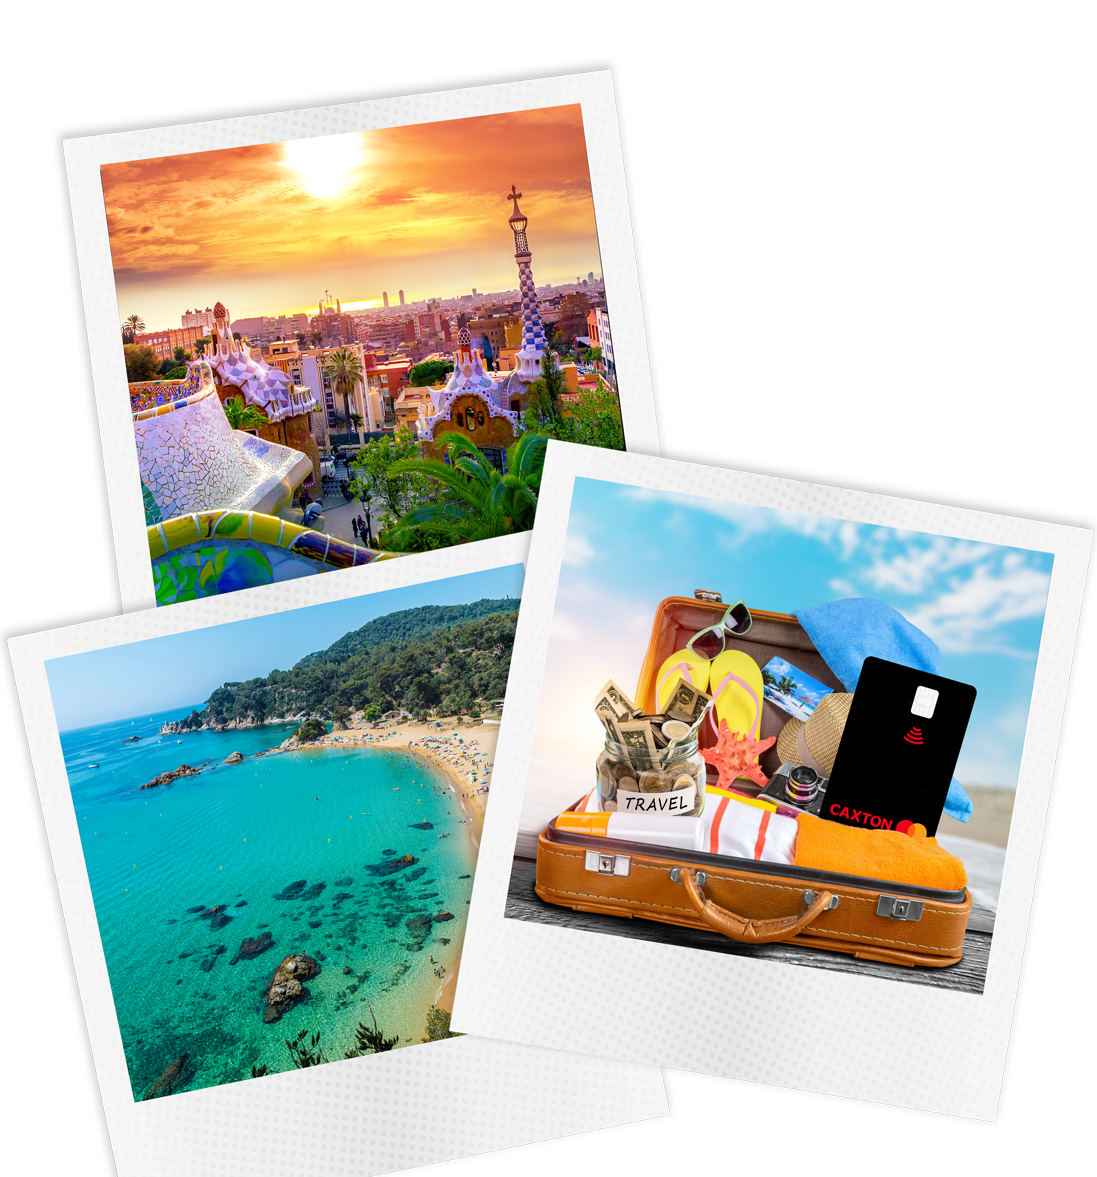 polaroids of a city, beach and suitcase